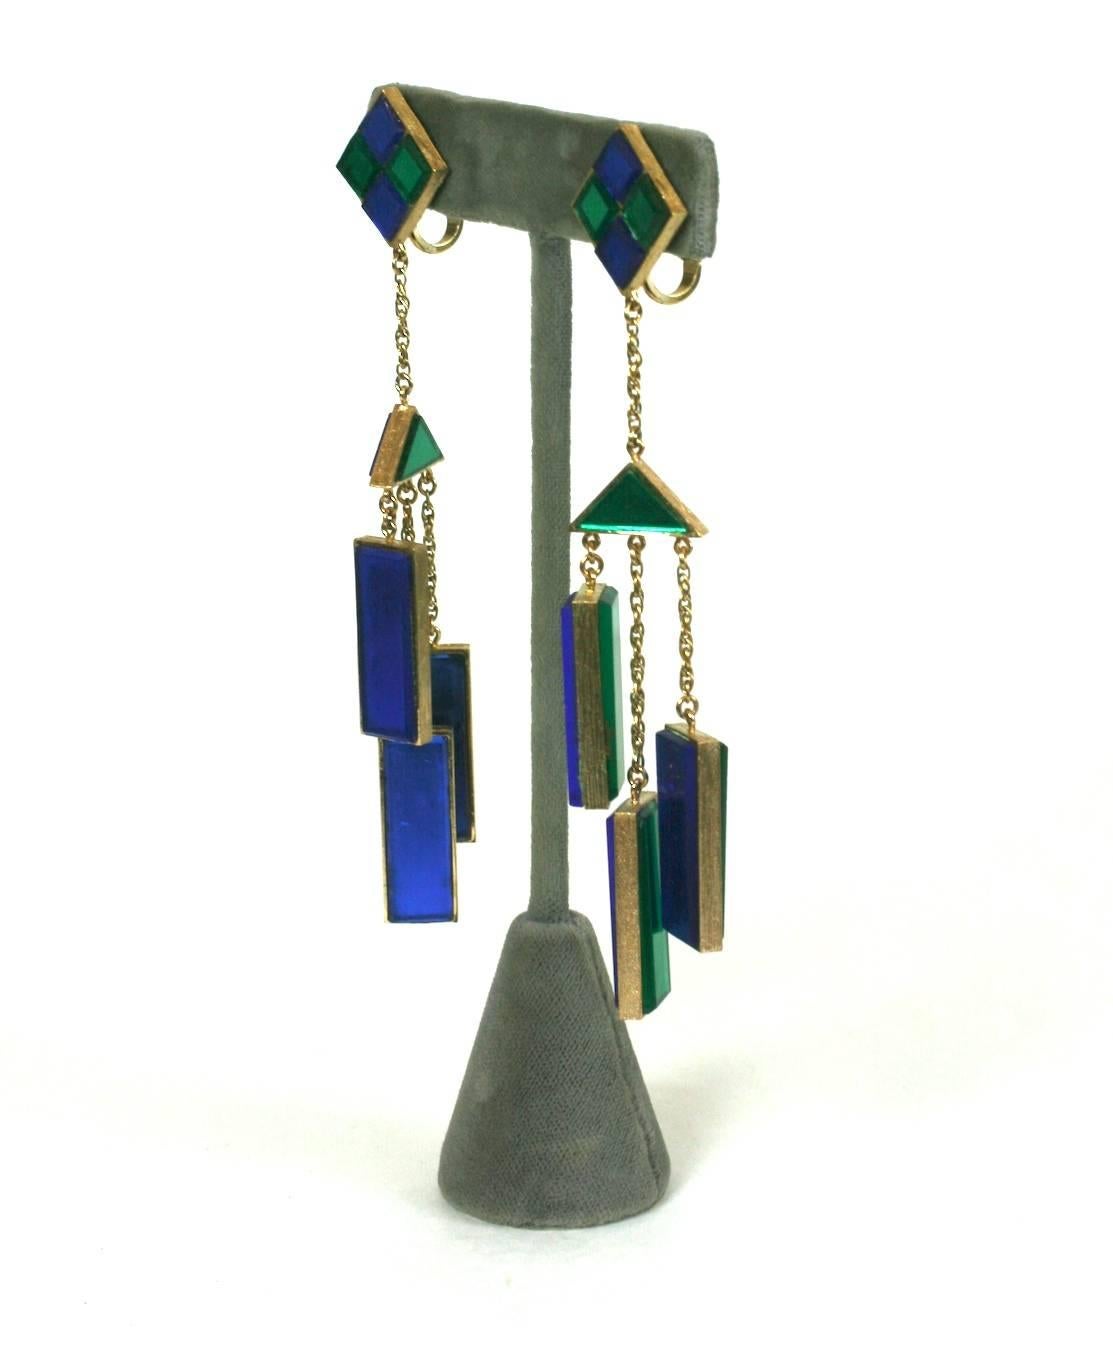 Trifari Mirrored Tile Mobile Earrings, oversized Mod styling with panels of royal blue and emerald glass mirror which move with the wearer. Clip back fittings. 
1960's USA. Excellent condition. 
4" x 1". 